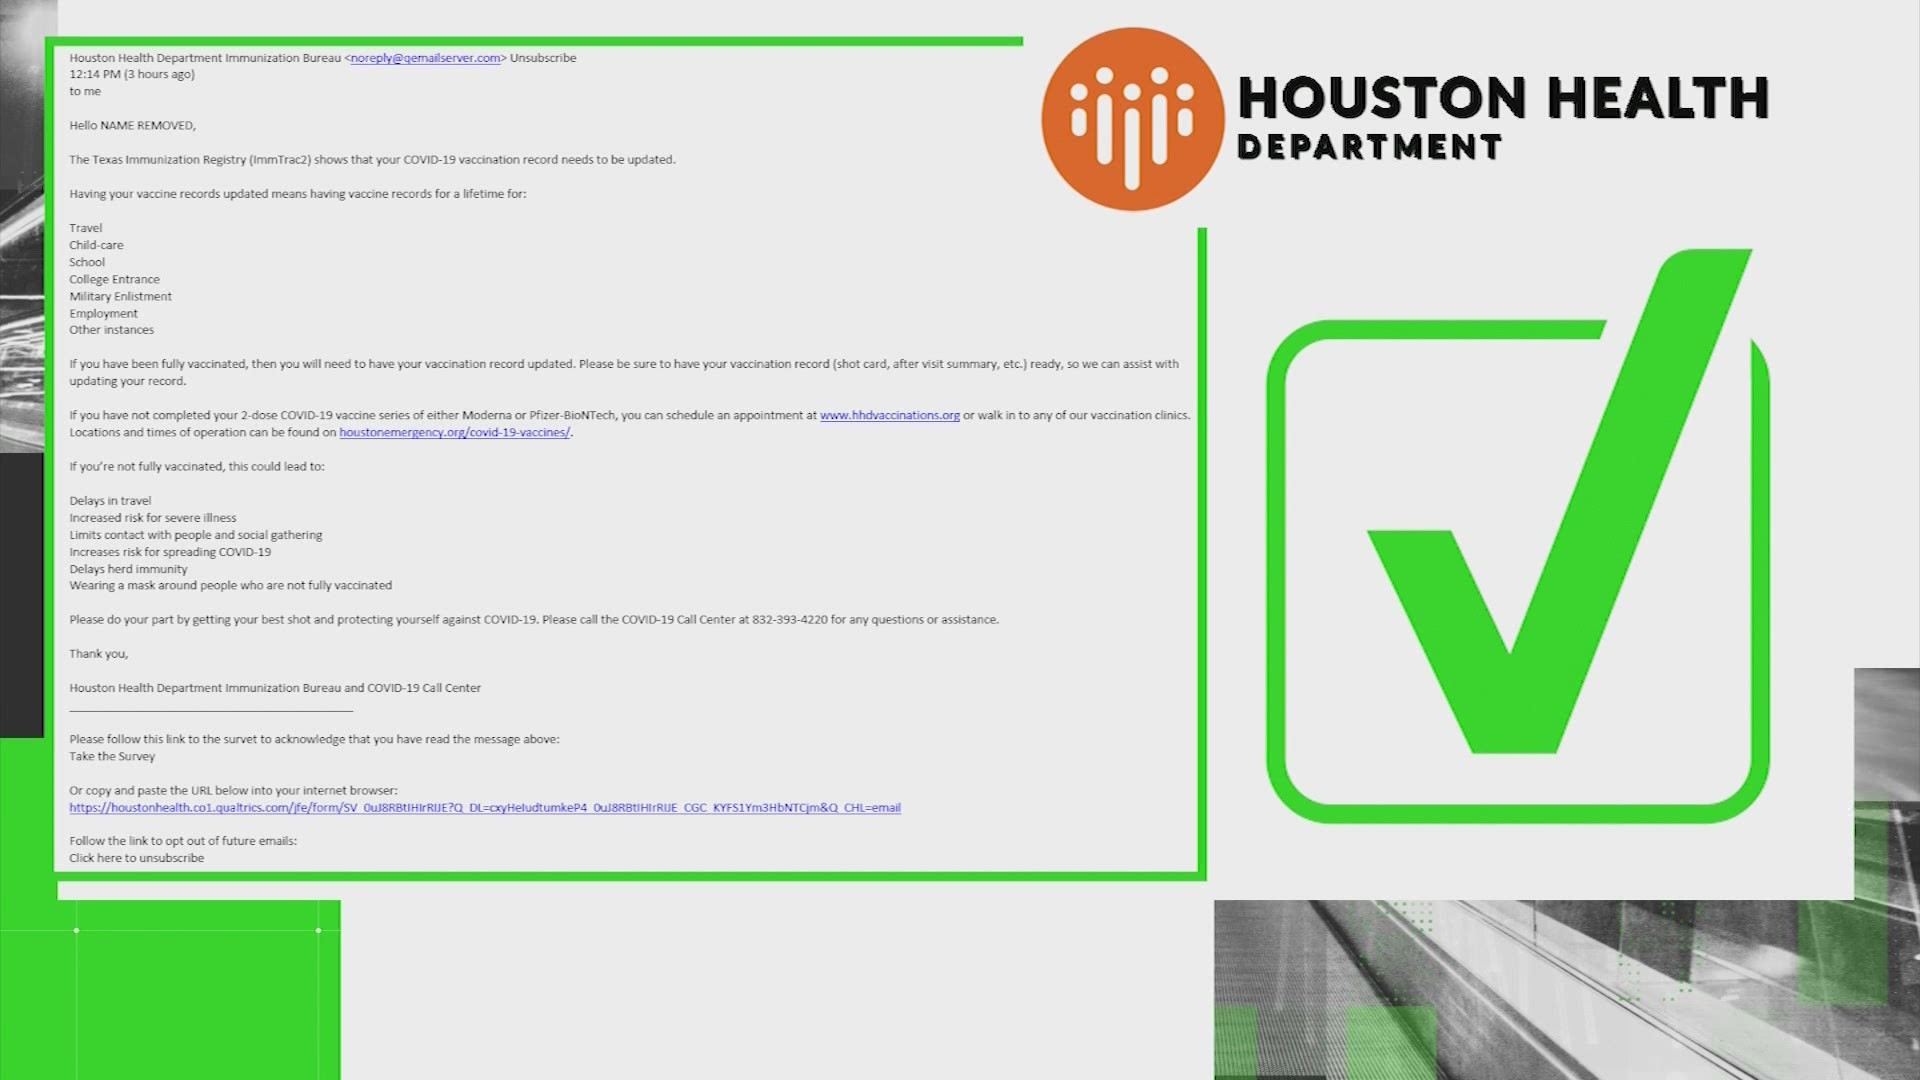 Viewers reached out to our VERIFY team wanting to know if emails they were receiving from the Houston Health Department and U.S. Census Bureau were legit.